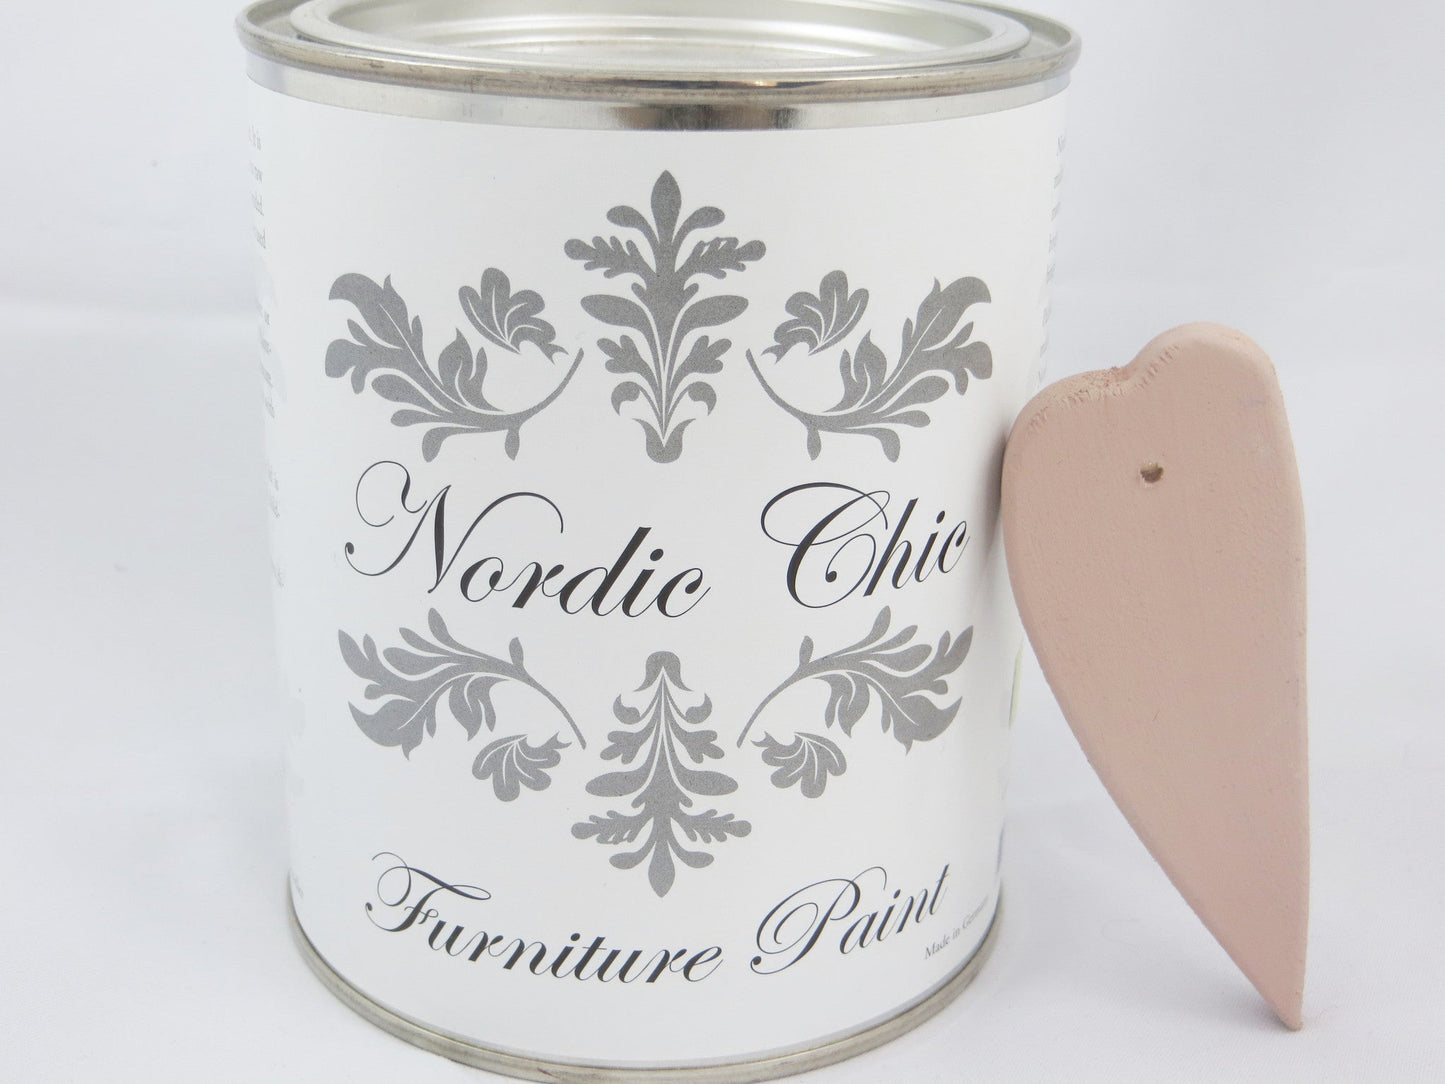 Nordic Chic Furniture Paint - Sandy - Nordic Chic®